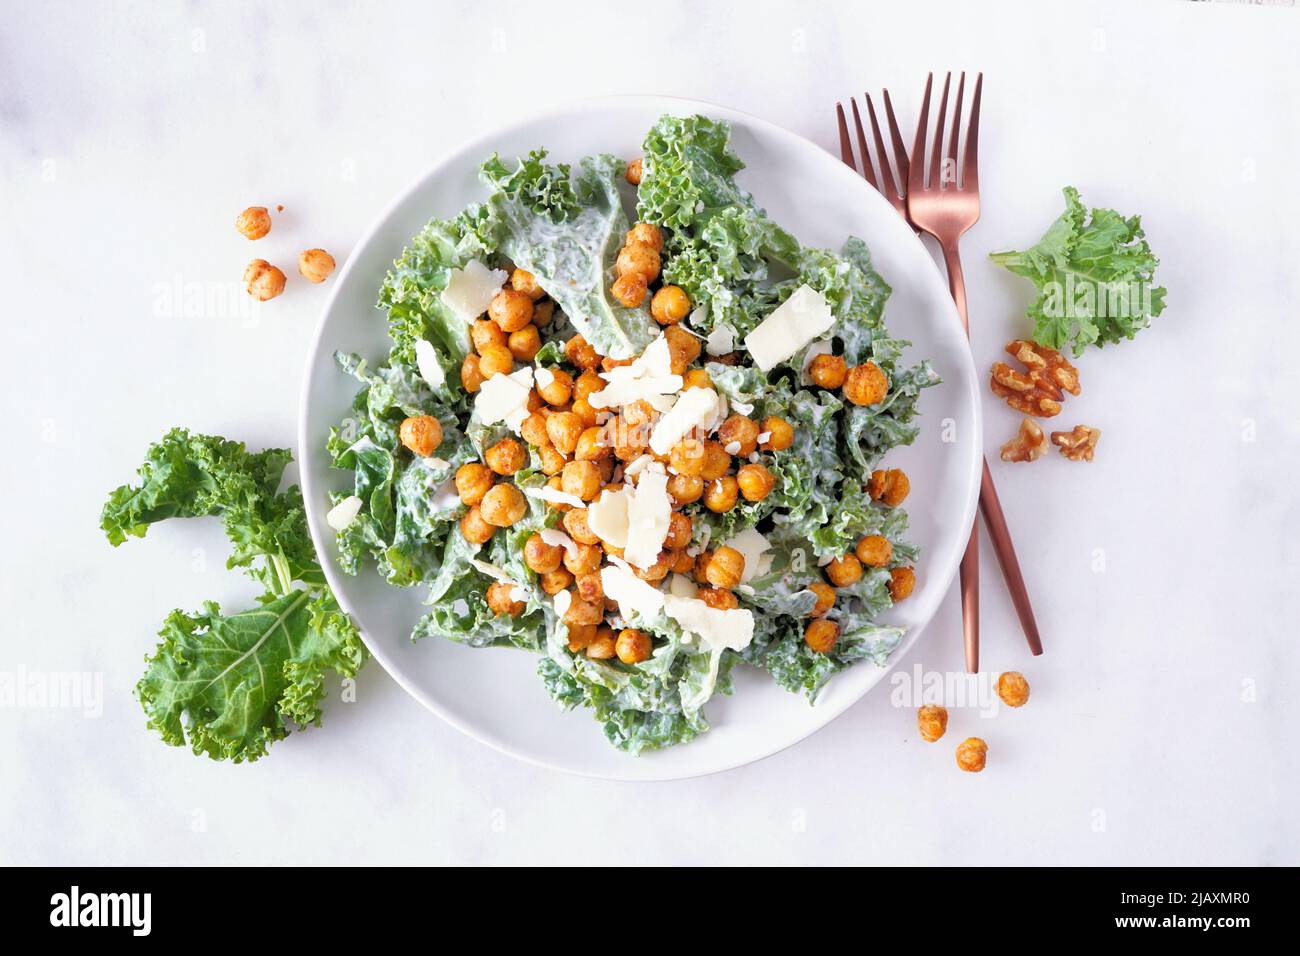 Vegetarian Caesar salad with chickpeas, kale and a yogurt dressing. Top view over a white marble background. Plant based food concept. Stock Photo